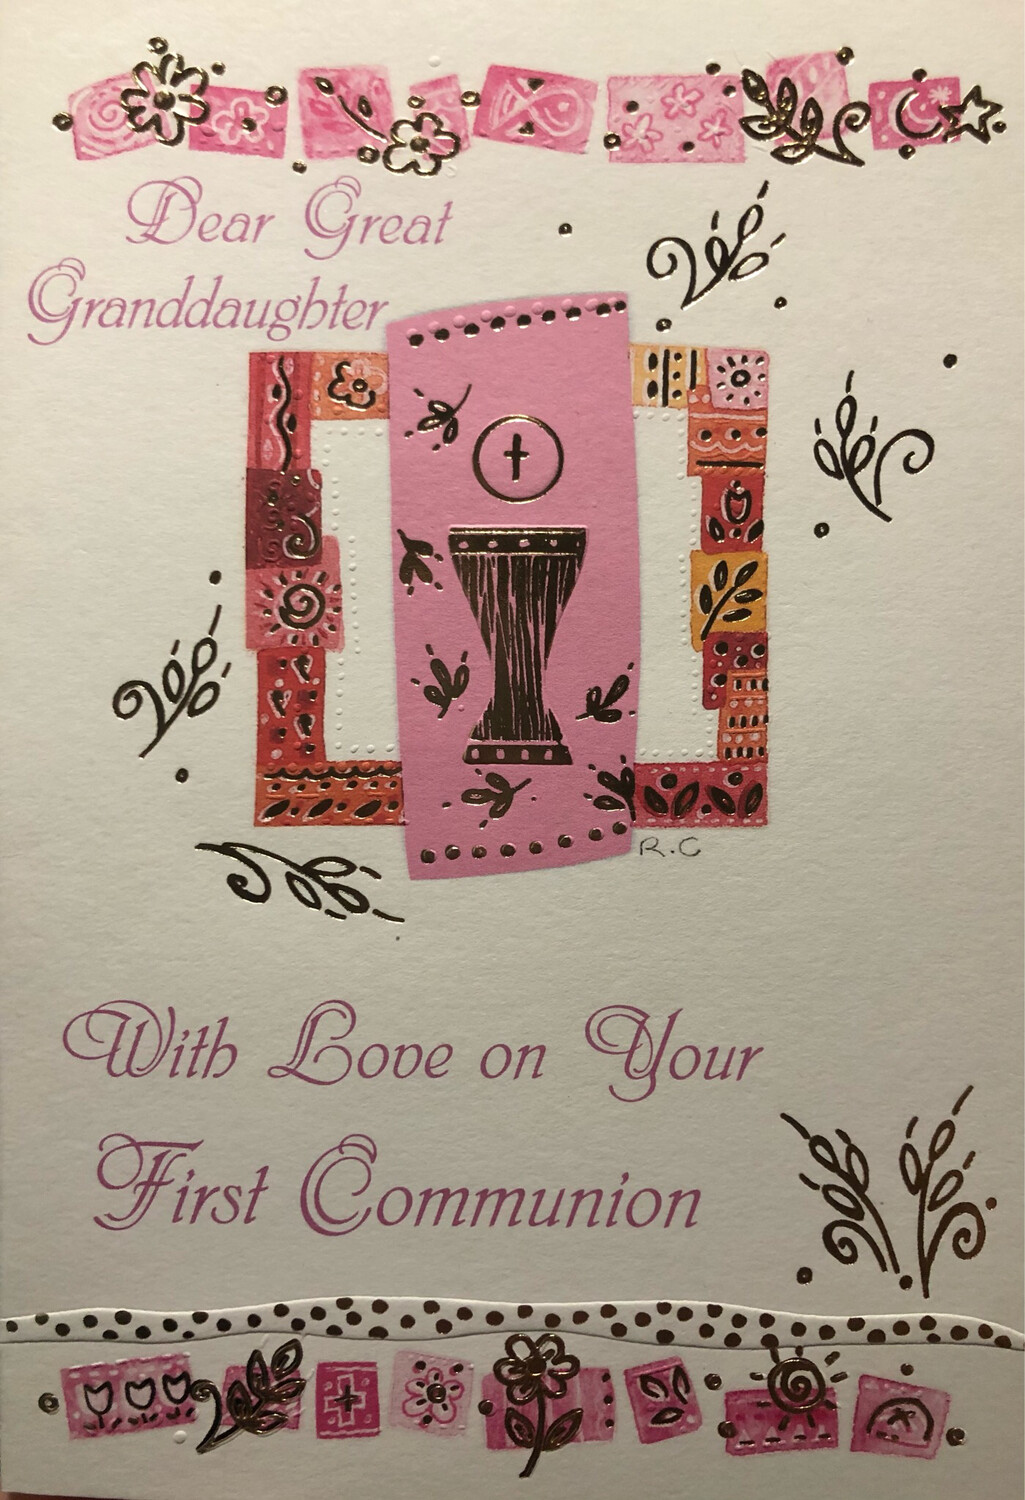 Dear Great Granddaughter With Love on Your First Communion